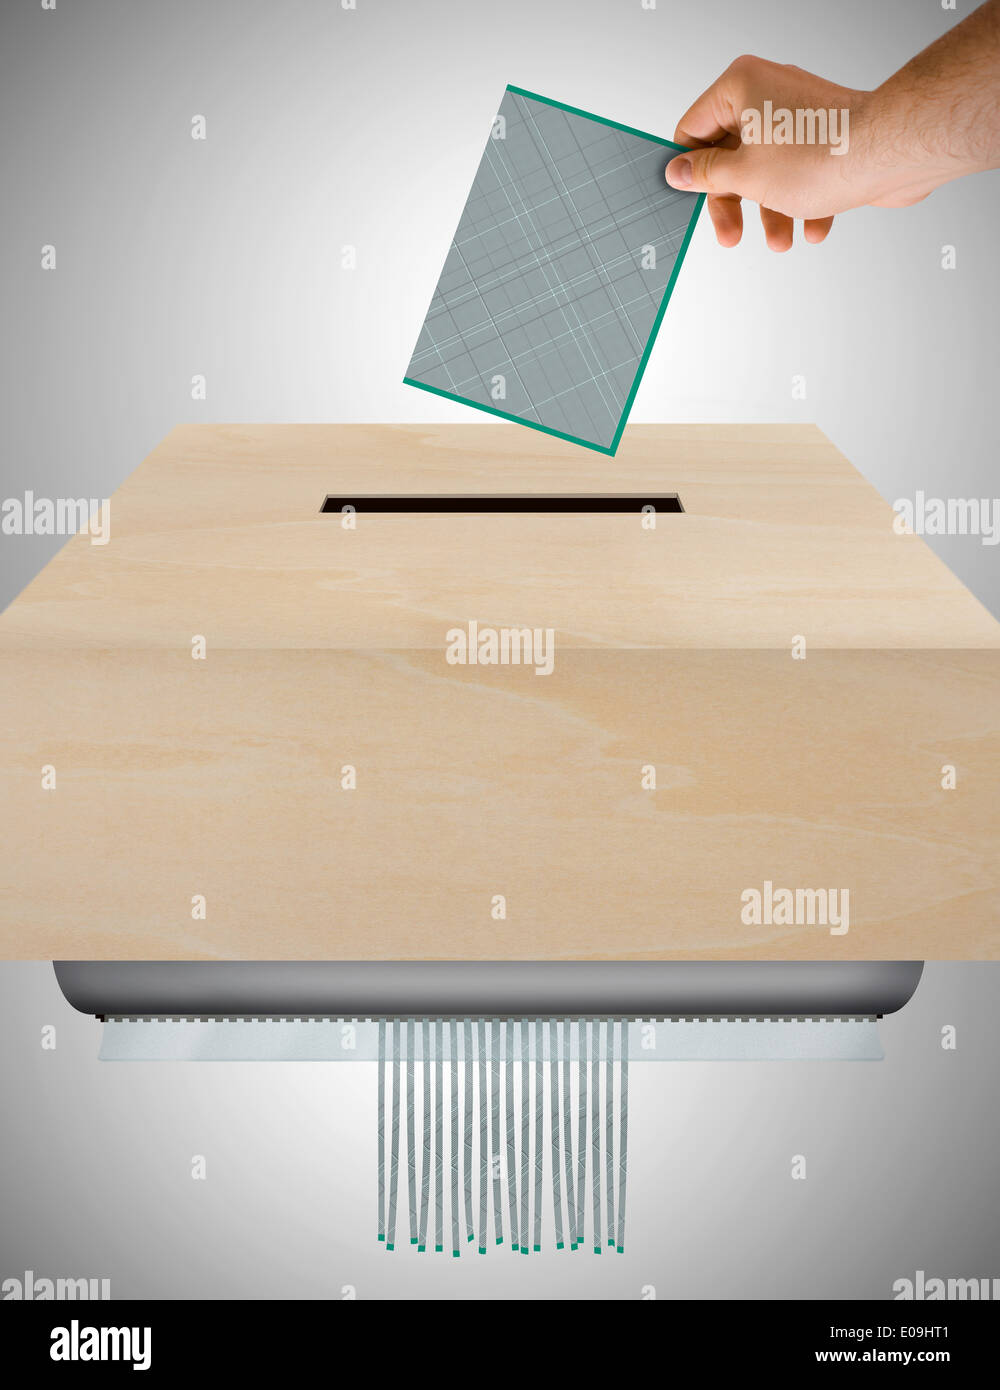 image that represents the ballot concept worthless Stock Photo